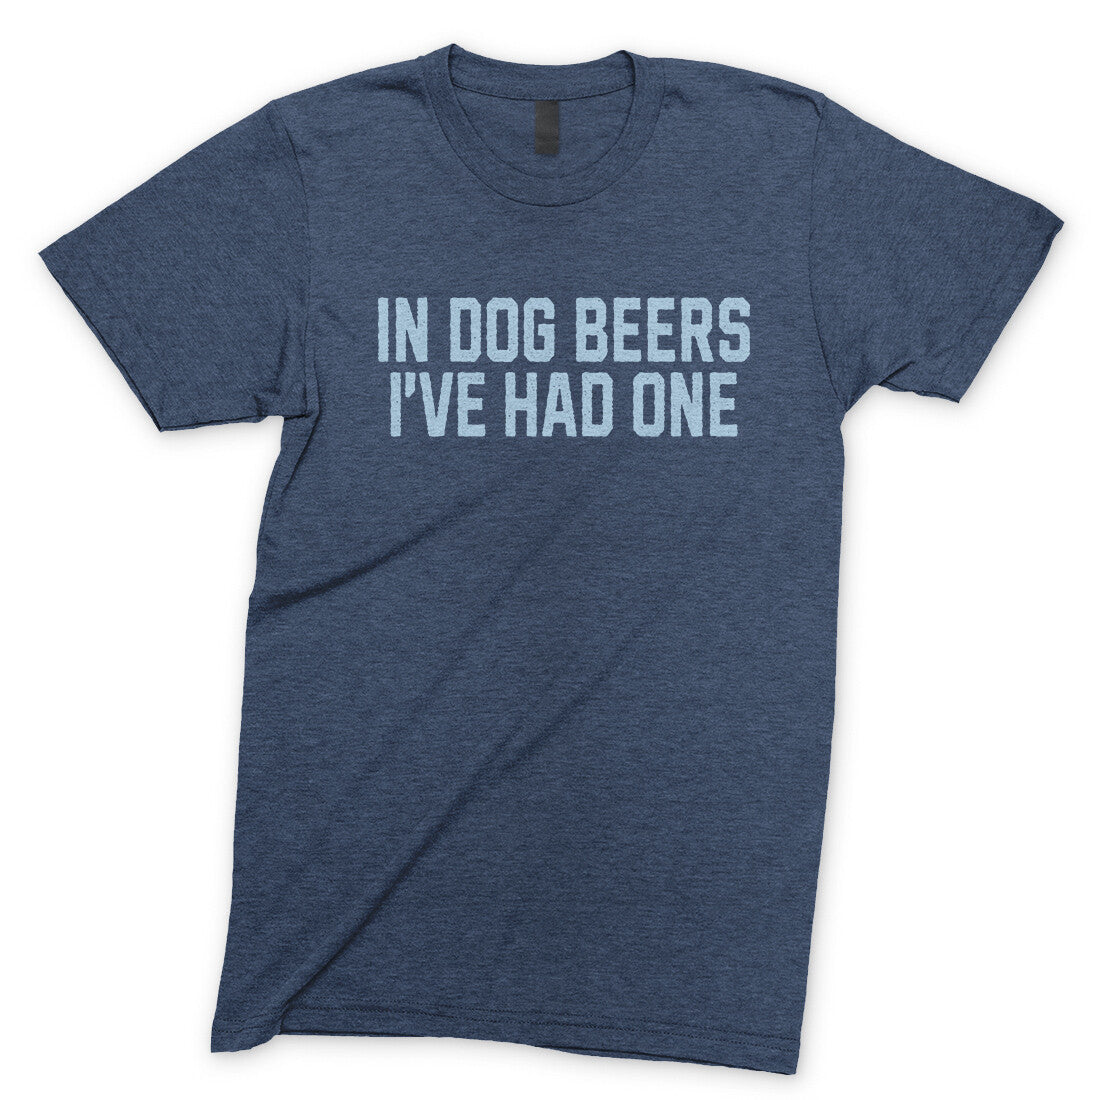 In Dog Beers I've Had One in Navy Heather Color